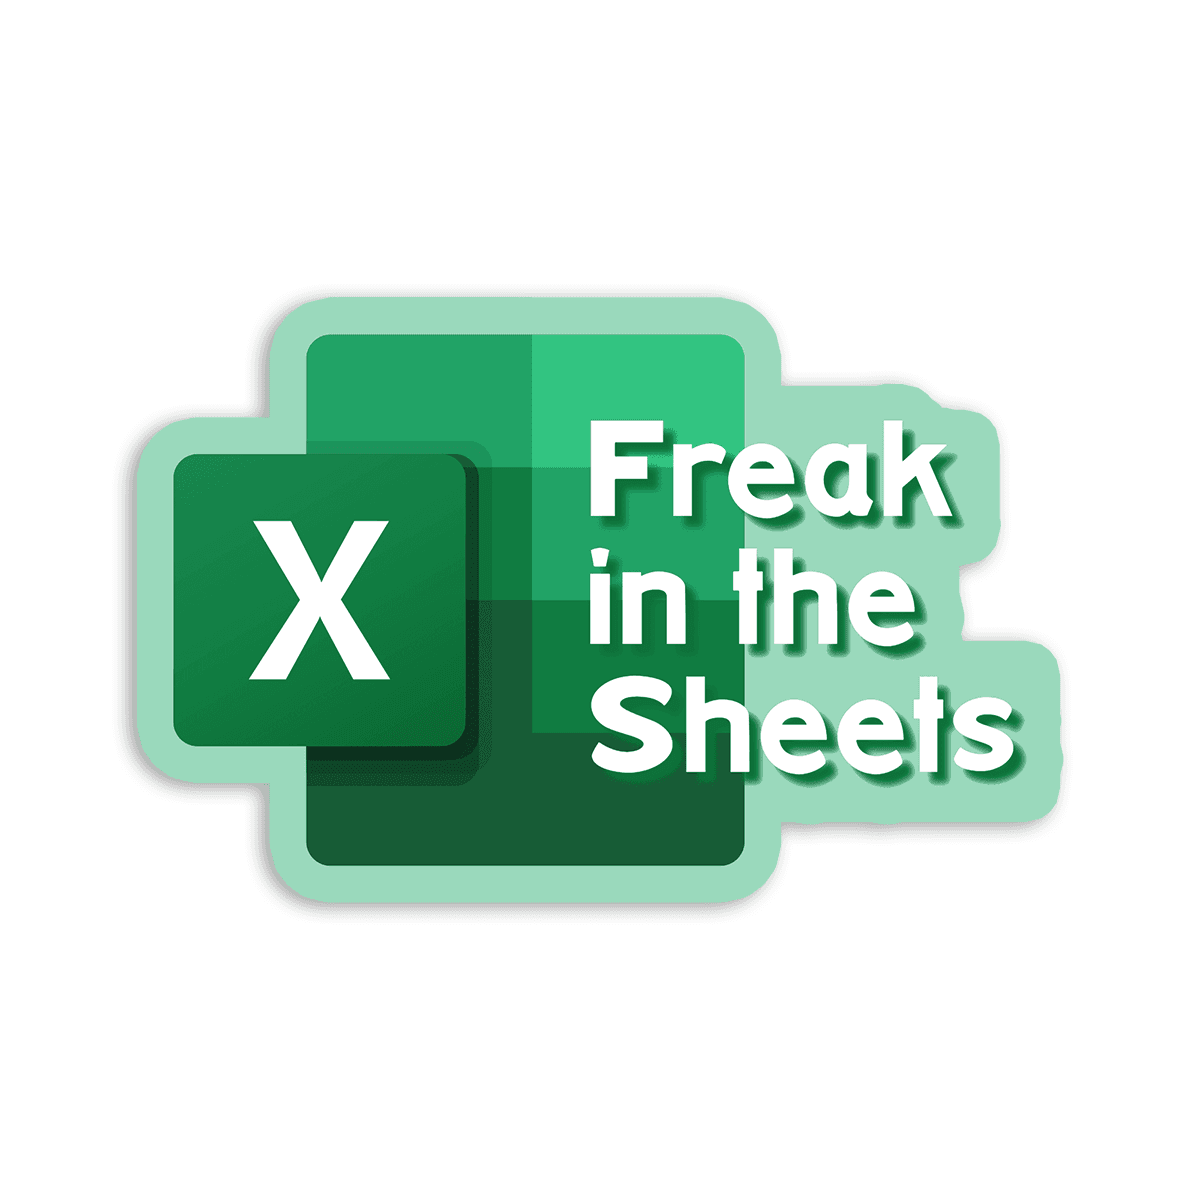 Image of a vinyl sticker that is 3 inch on its longest side with a spreadsheet theme